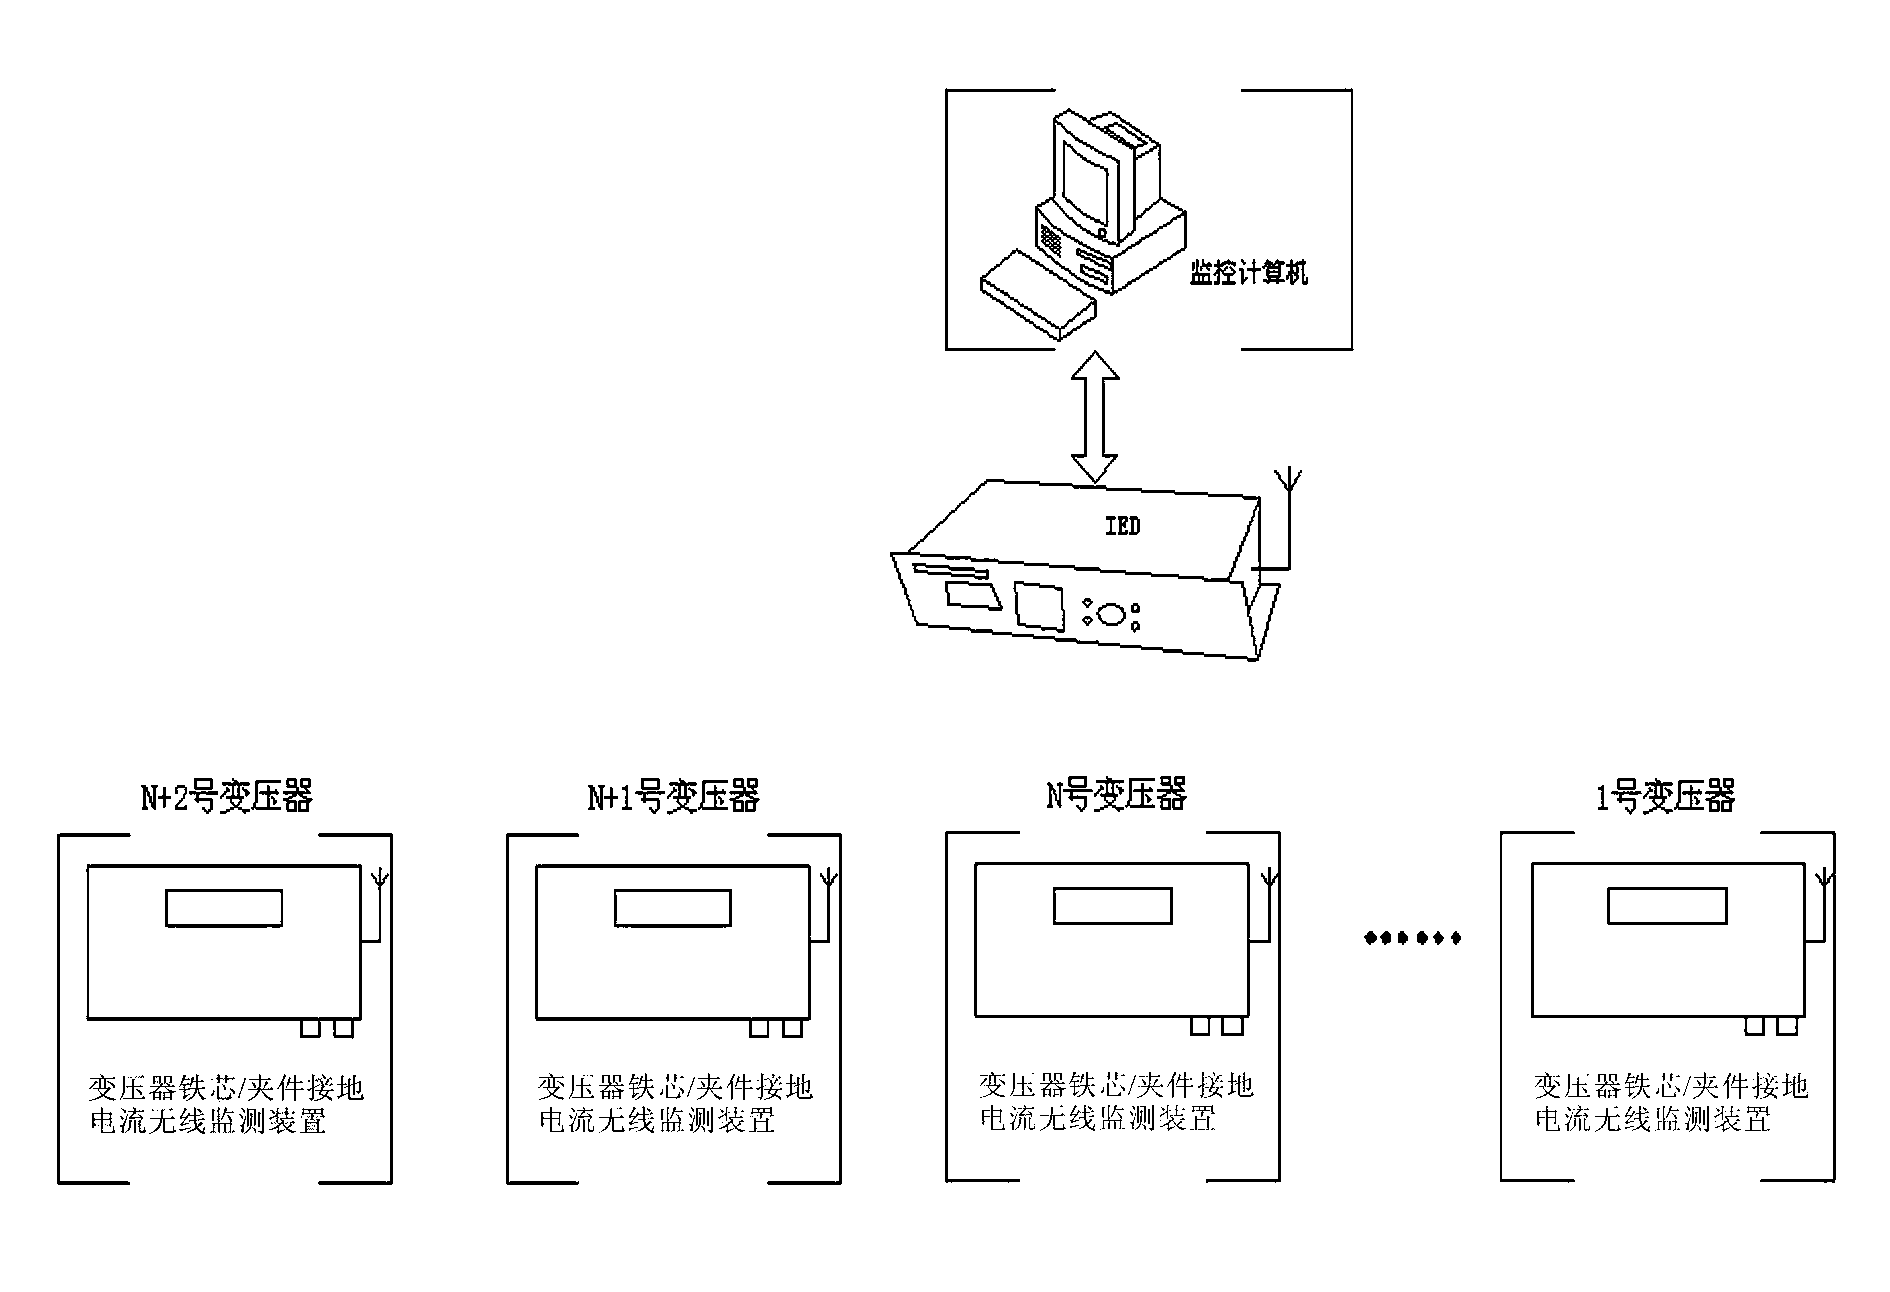 Wireless monitoring device and monitoring method for grounding current of transformer core/clamp